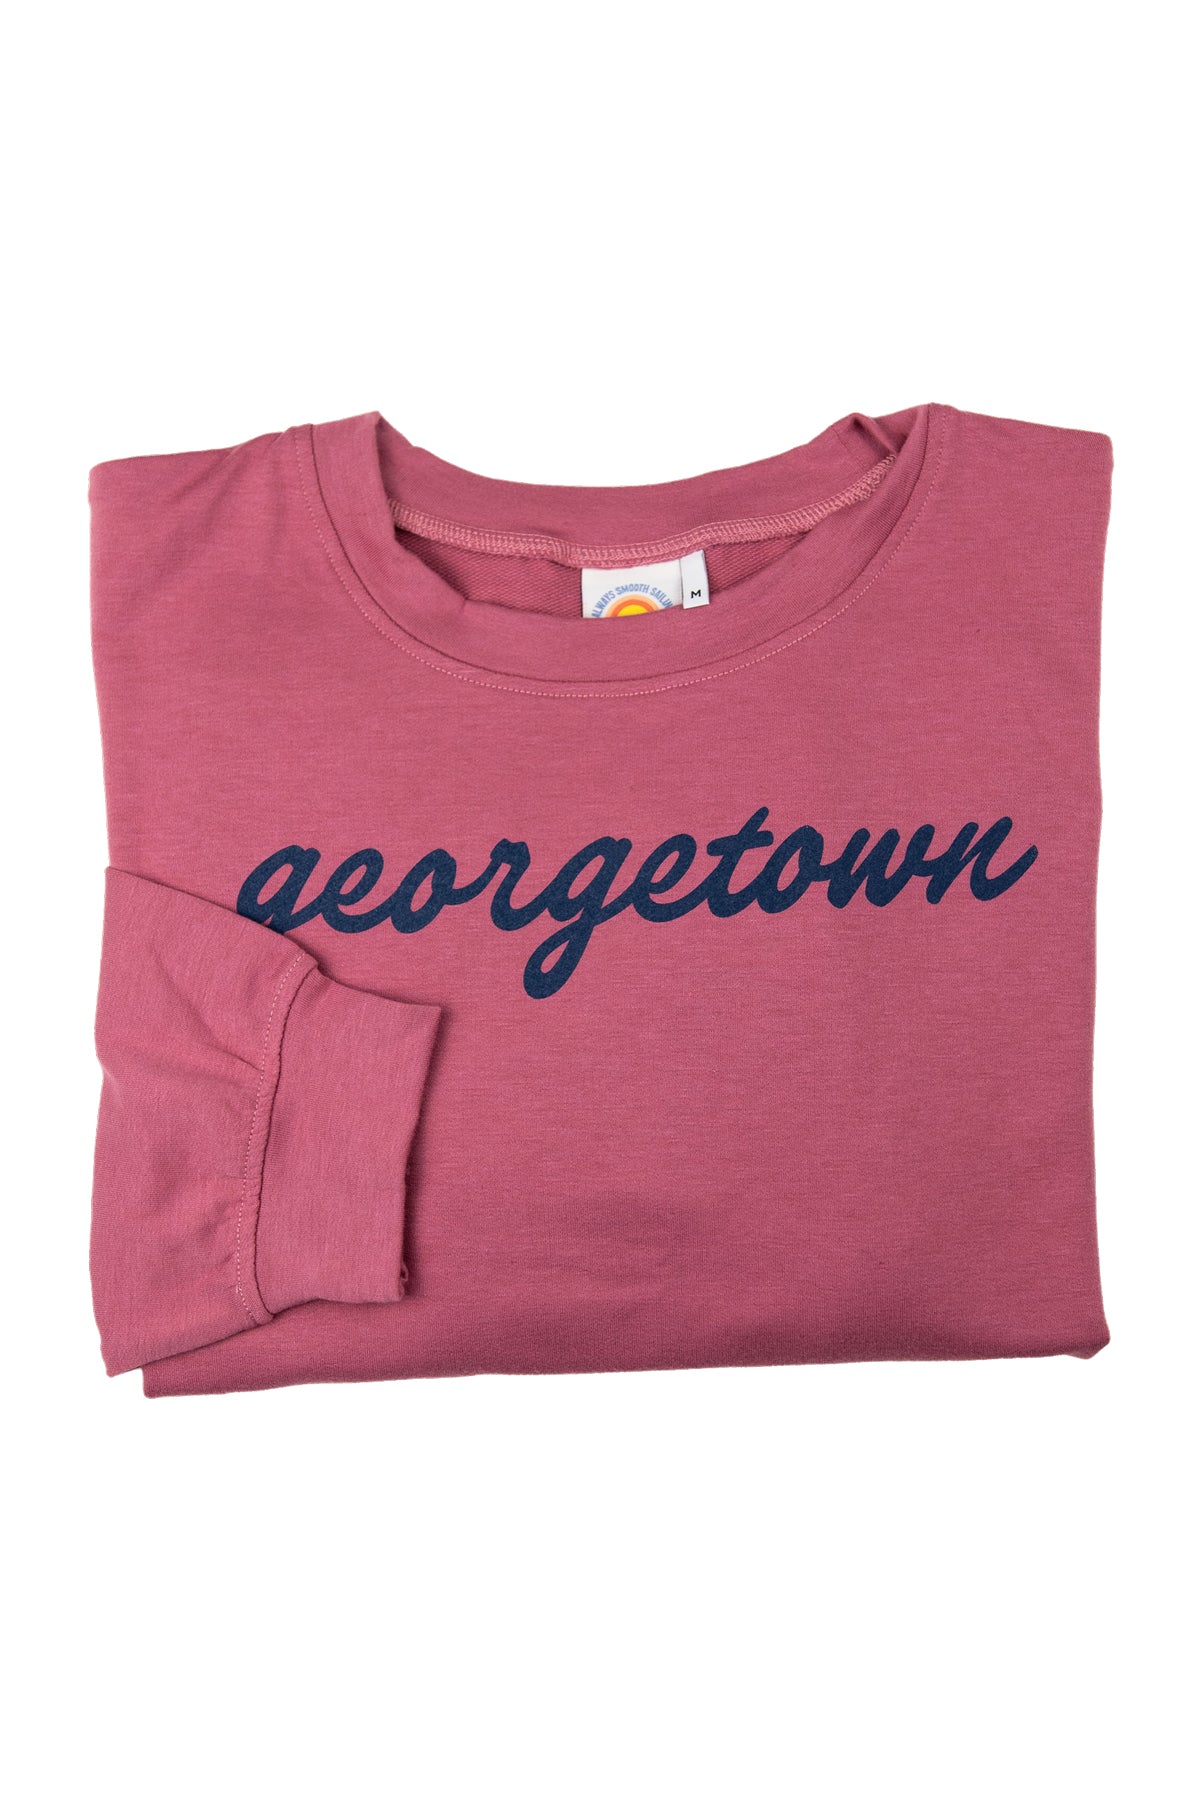 GEORGETOWN SCRIPT FRENCH TERRY LONG SLEEVE